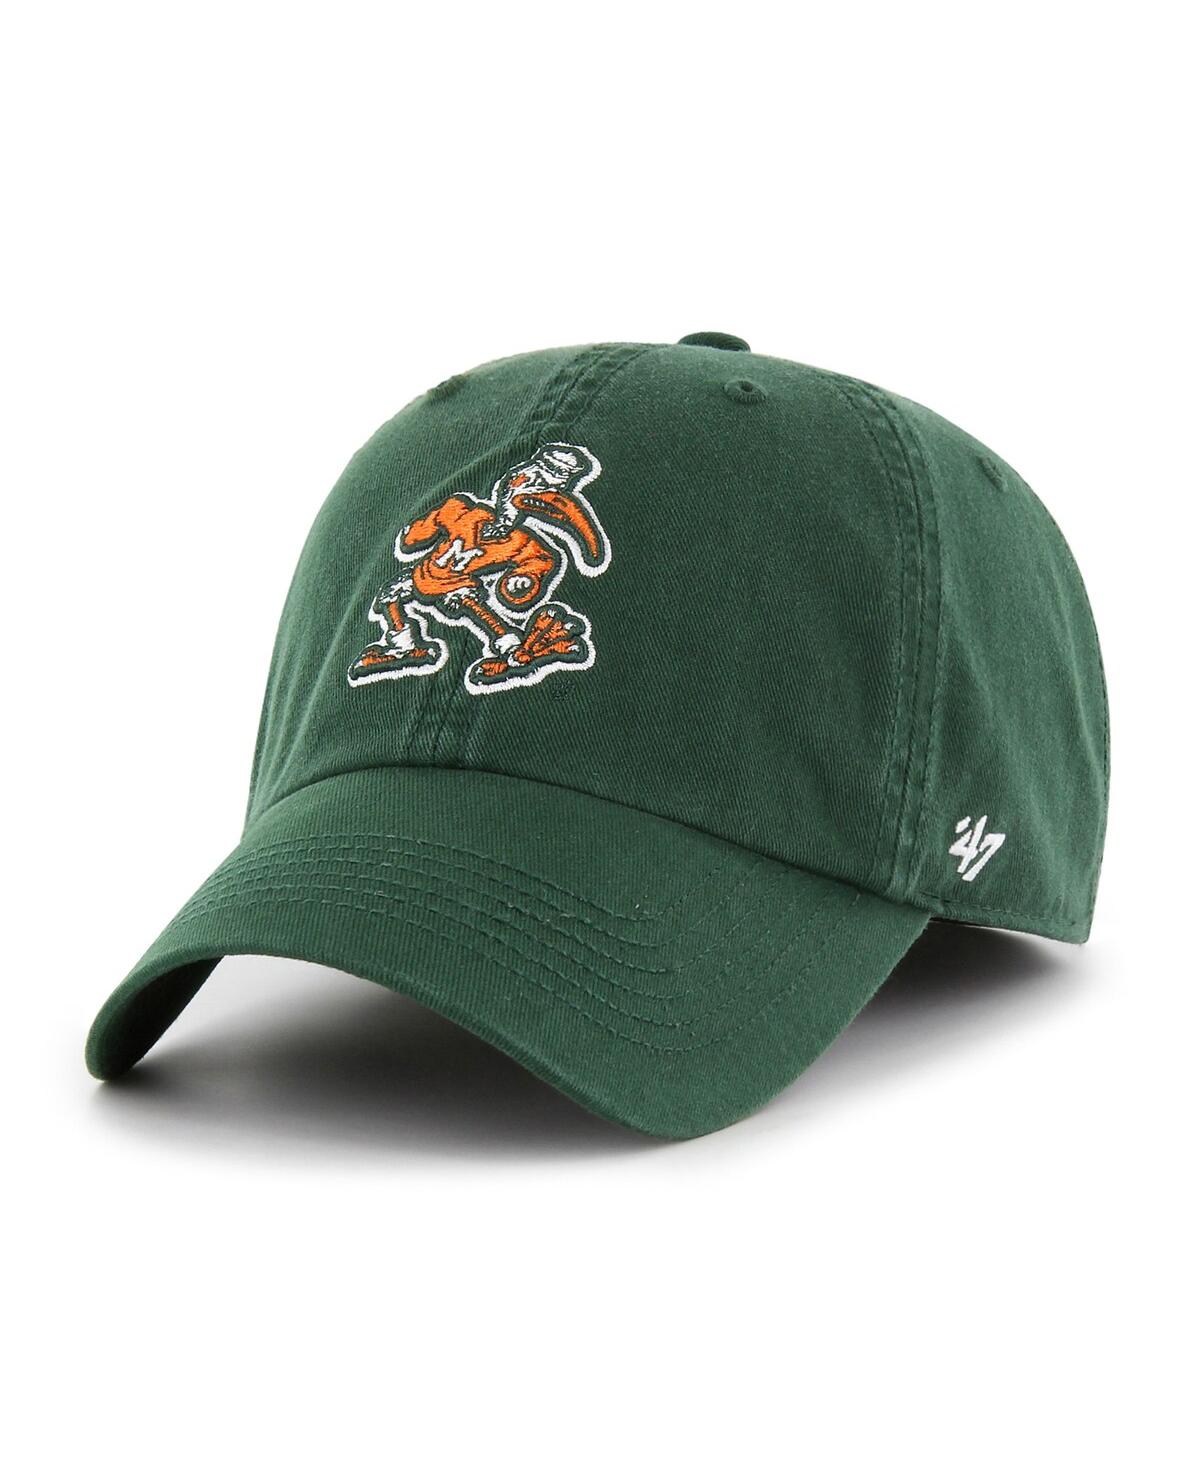 47 Brand Men's ' Green Miami Hurricanes Franchise Fitted Hat